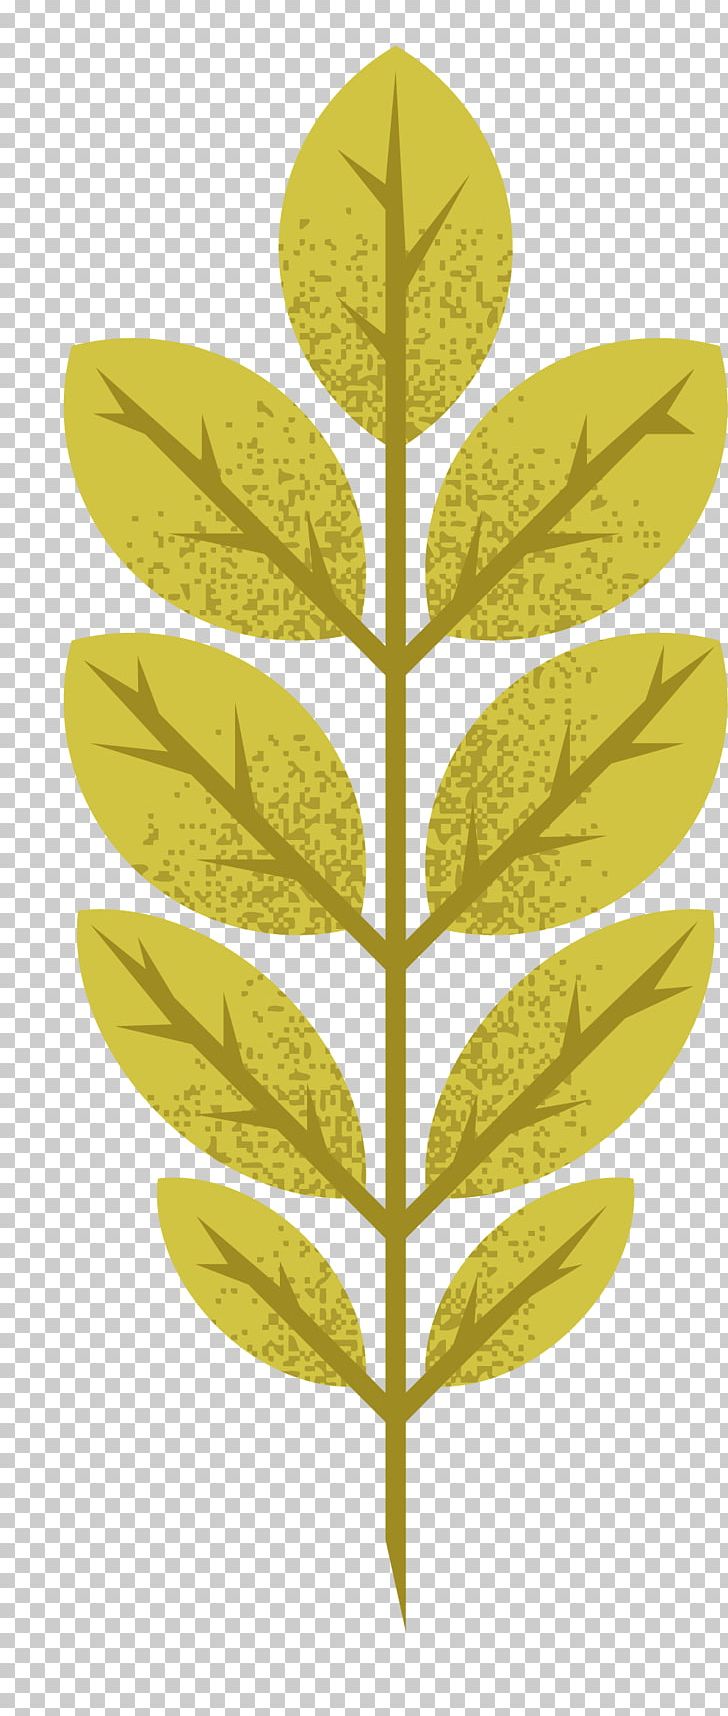 Maple Leaf Autumn PNG, Clipart, Encapsulated Postscript, Fall Leaves, Happy Birthday Vector Images, Leaf, Leaves Free PNG Download